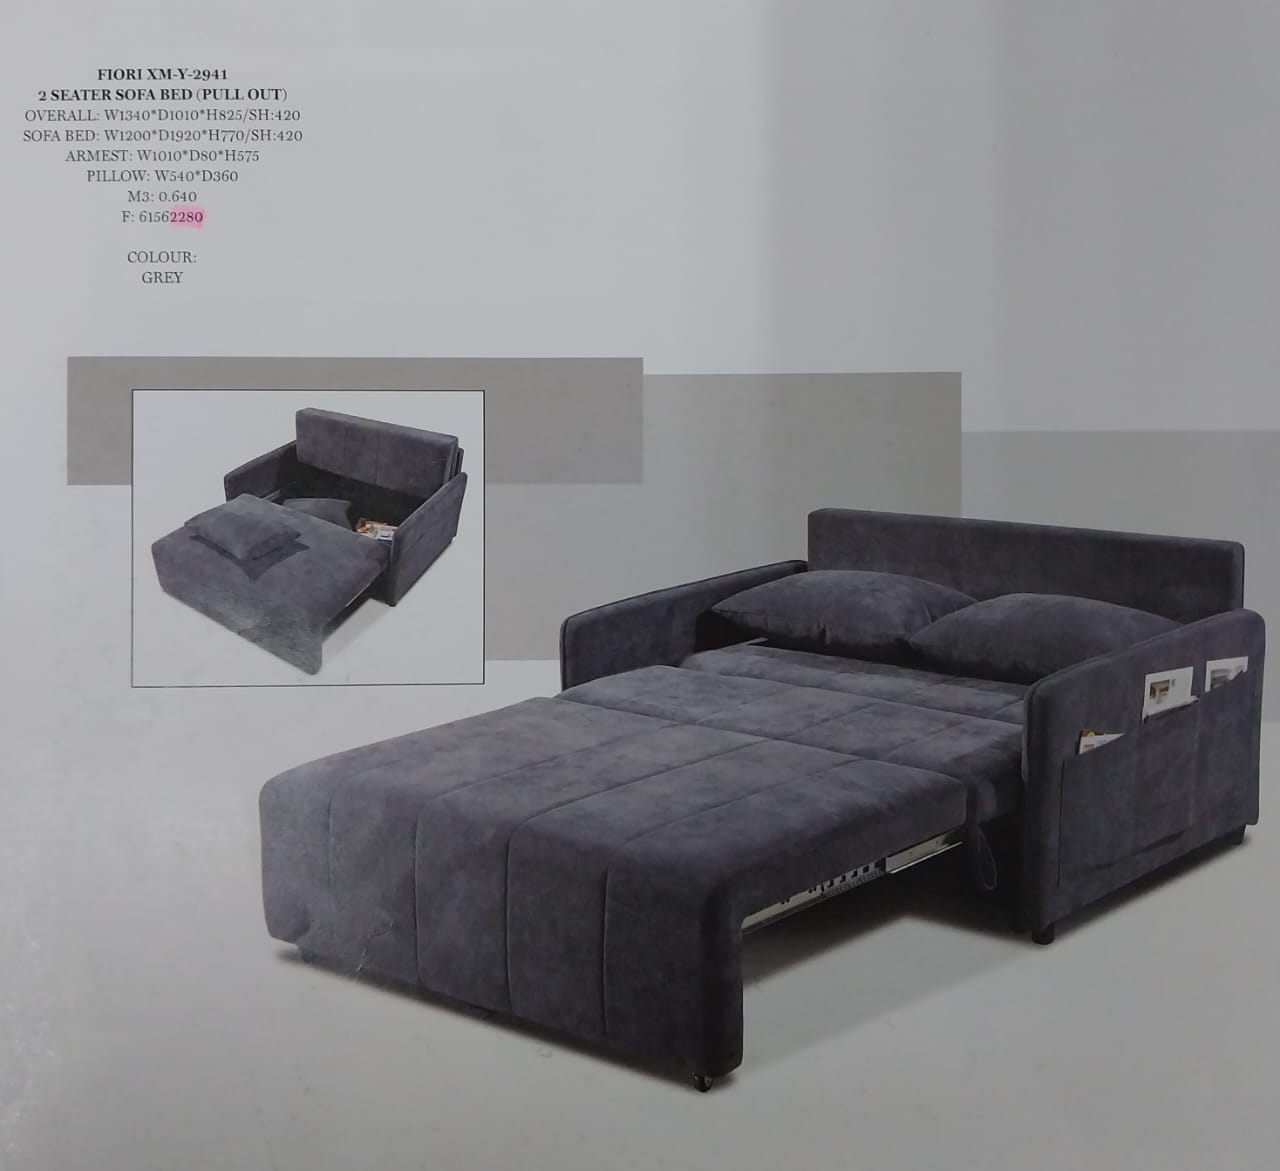 Product: Sofa bed 002